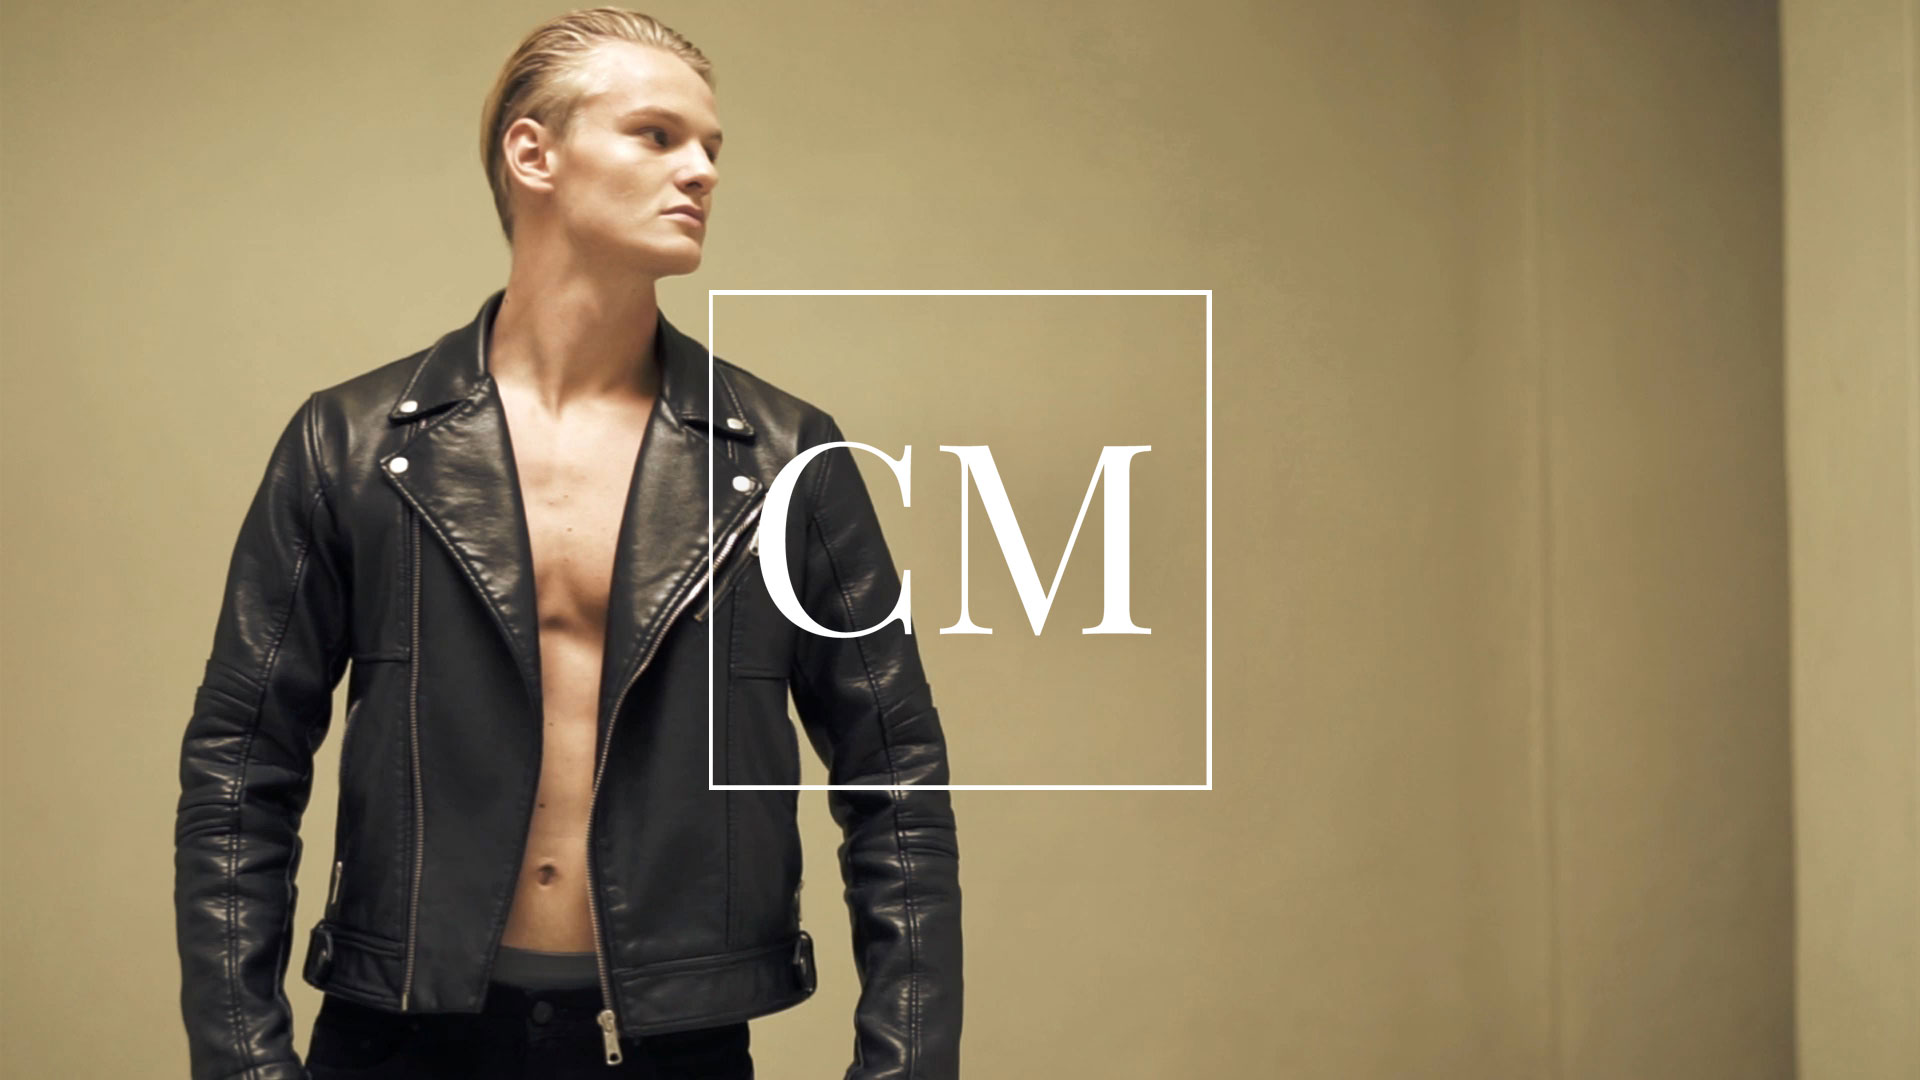 louise-male-model-modeling-agency-new-face-fashion-leather-jacket-wall-posing-man